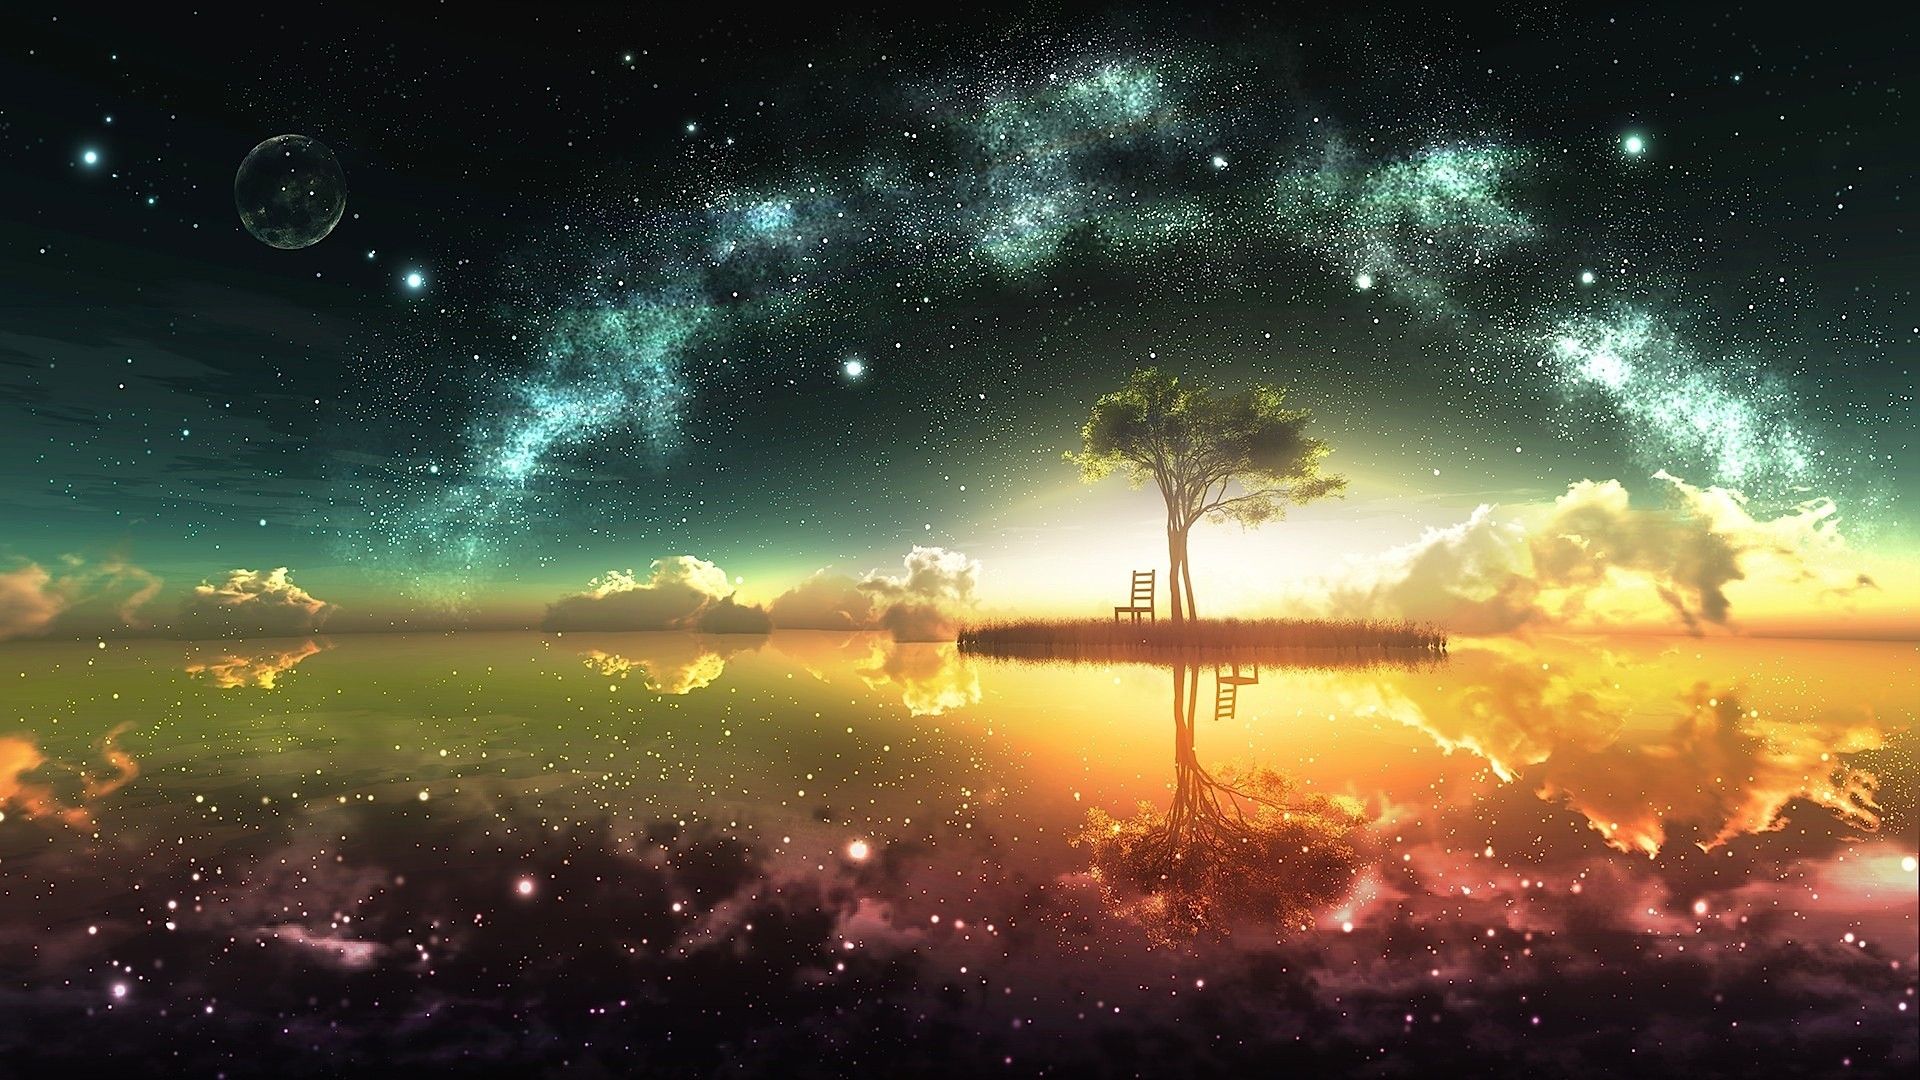 Anime Starry Sky Art Wallpapers - Wallpaper Cave